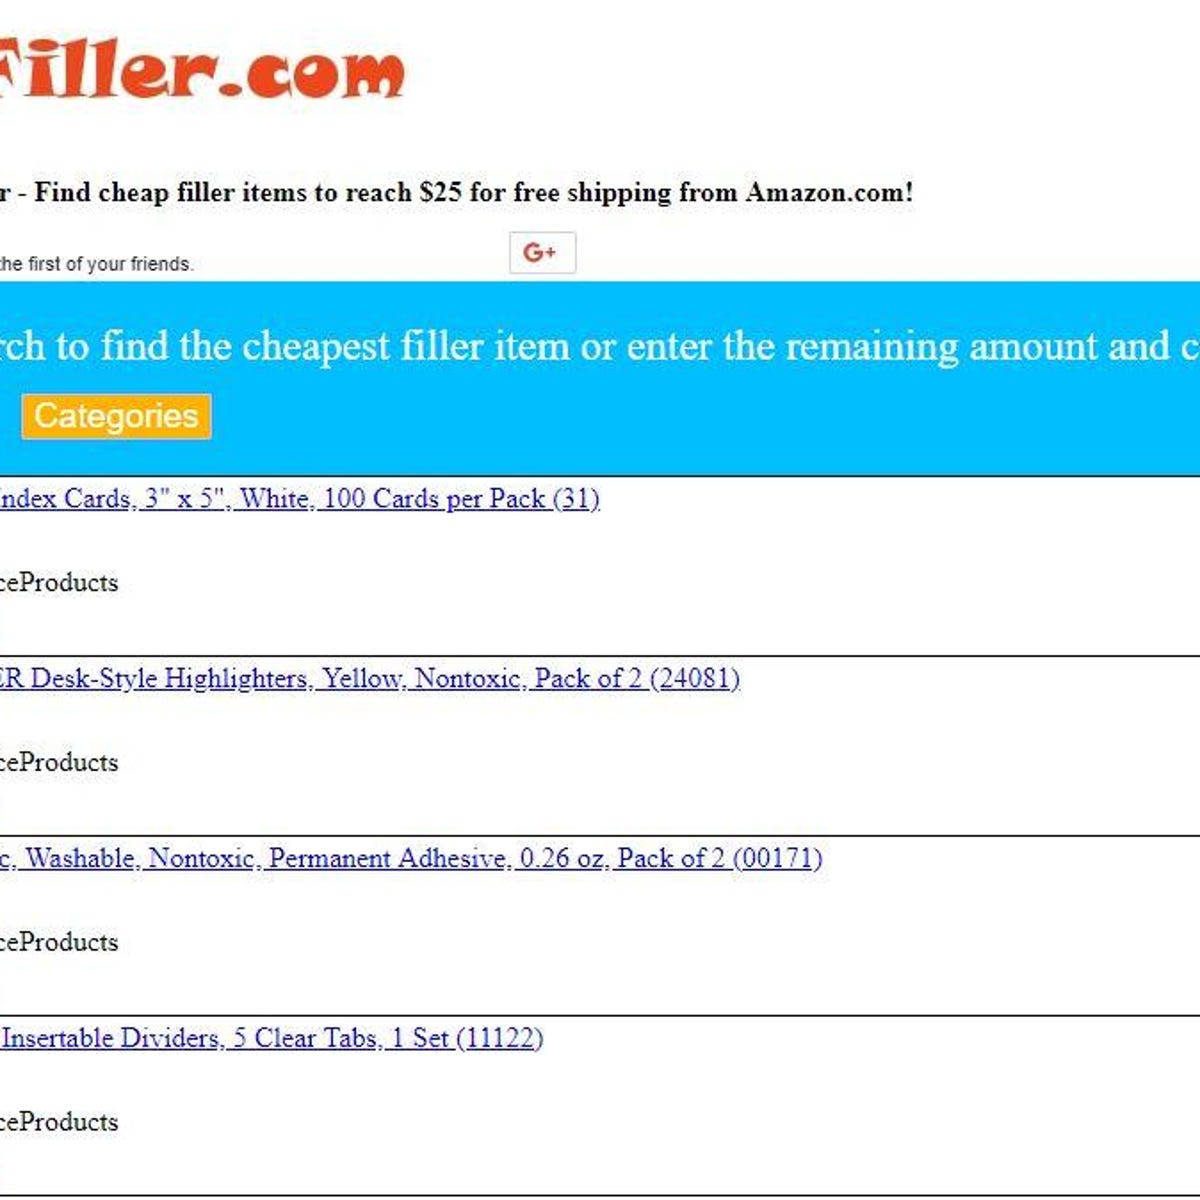 Score  free shipping with this tool that finds cheap filler items -  CNET